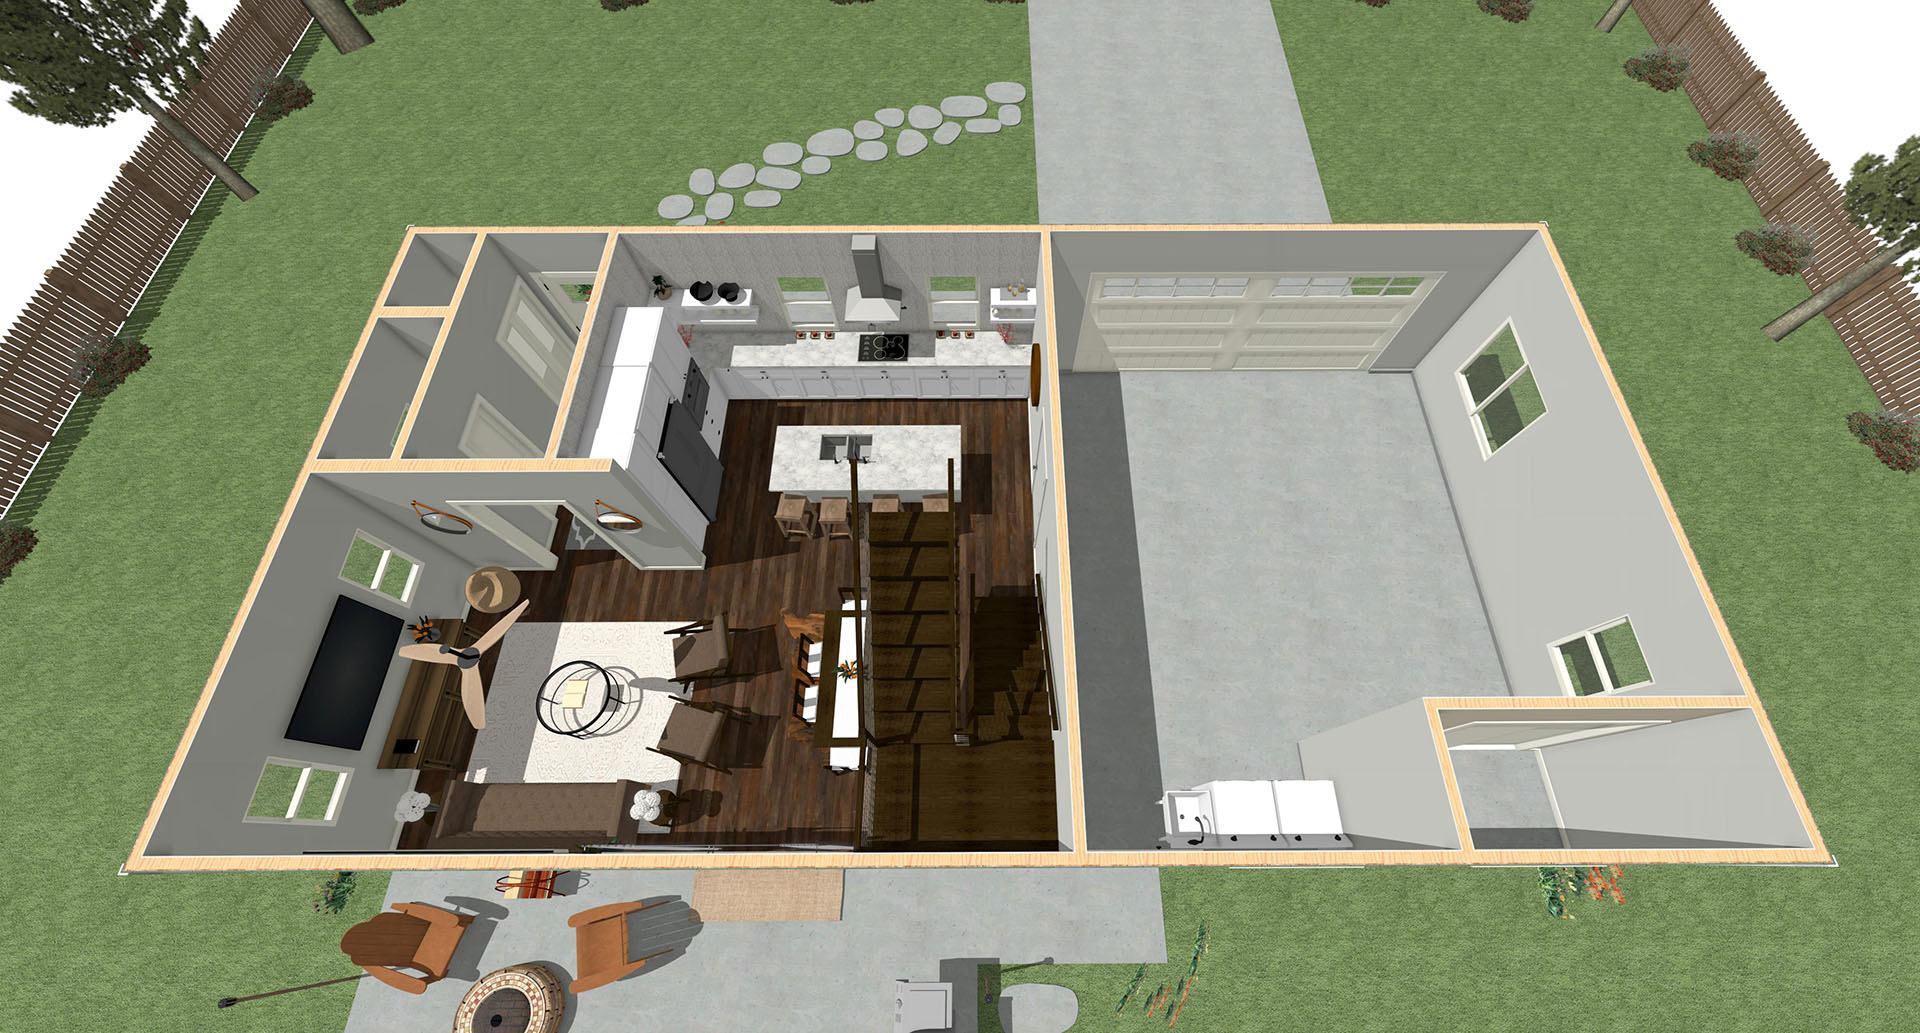 Aerial view of a house's living room and kitchen in the downstairs area